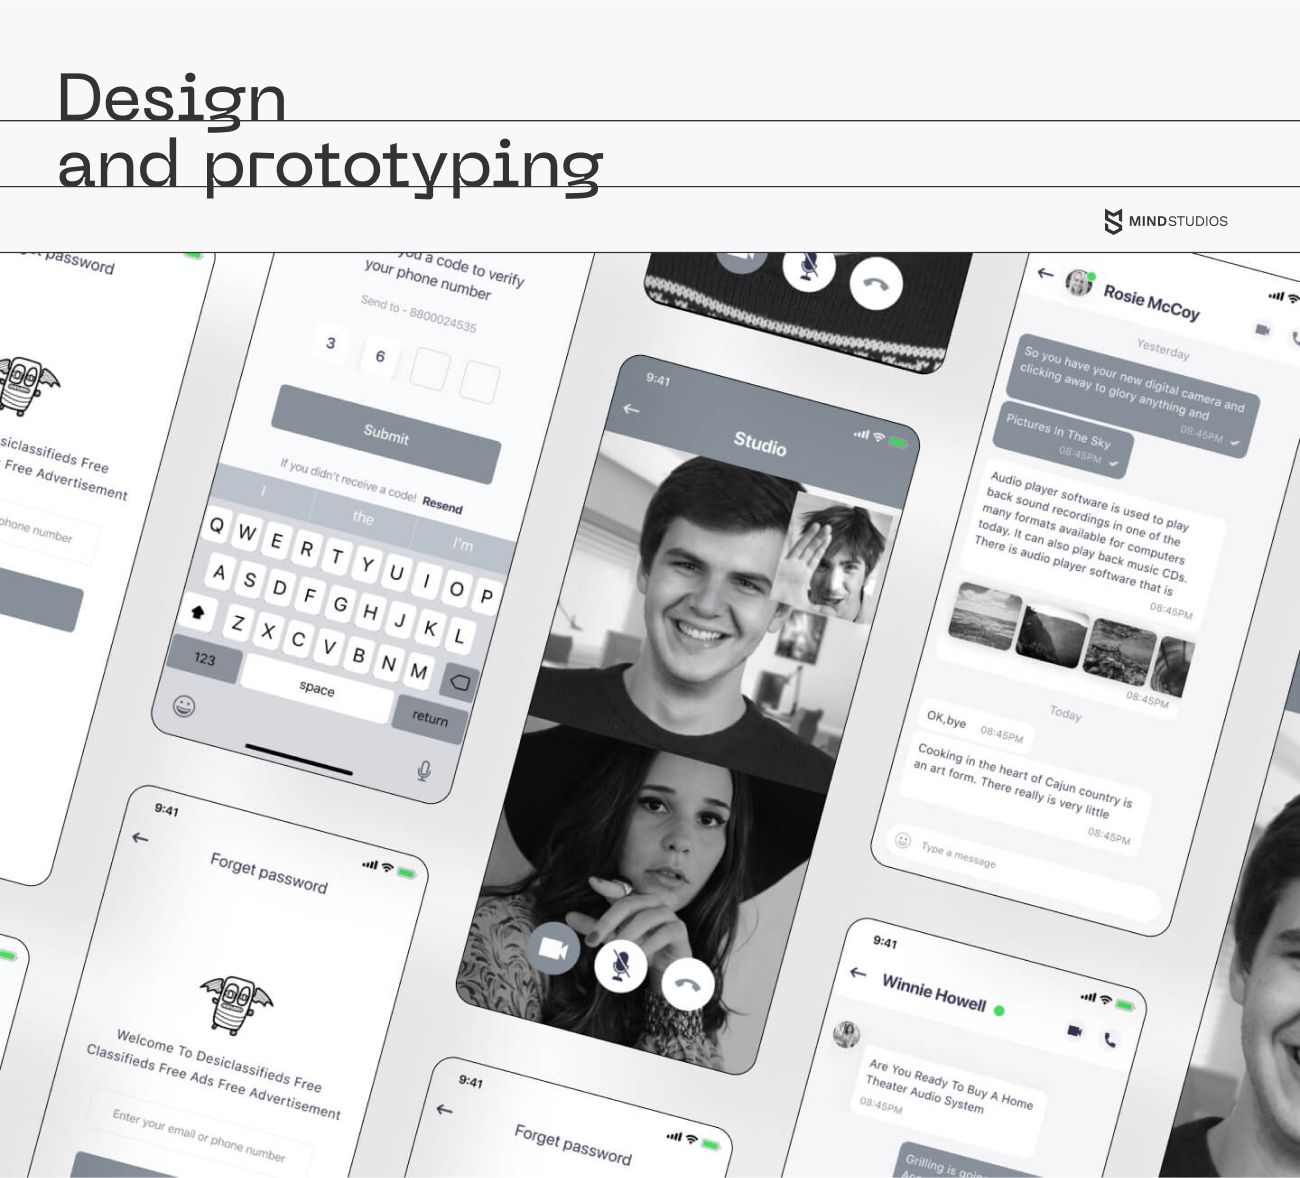 Design and prototyping